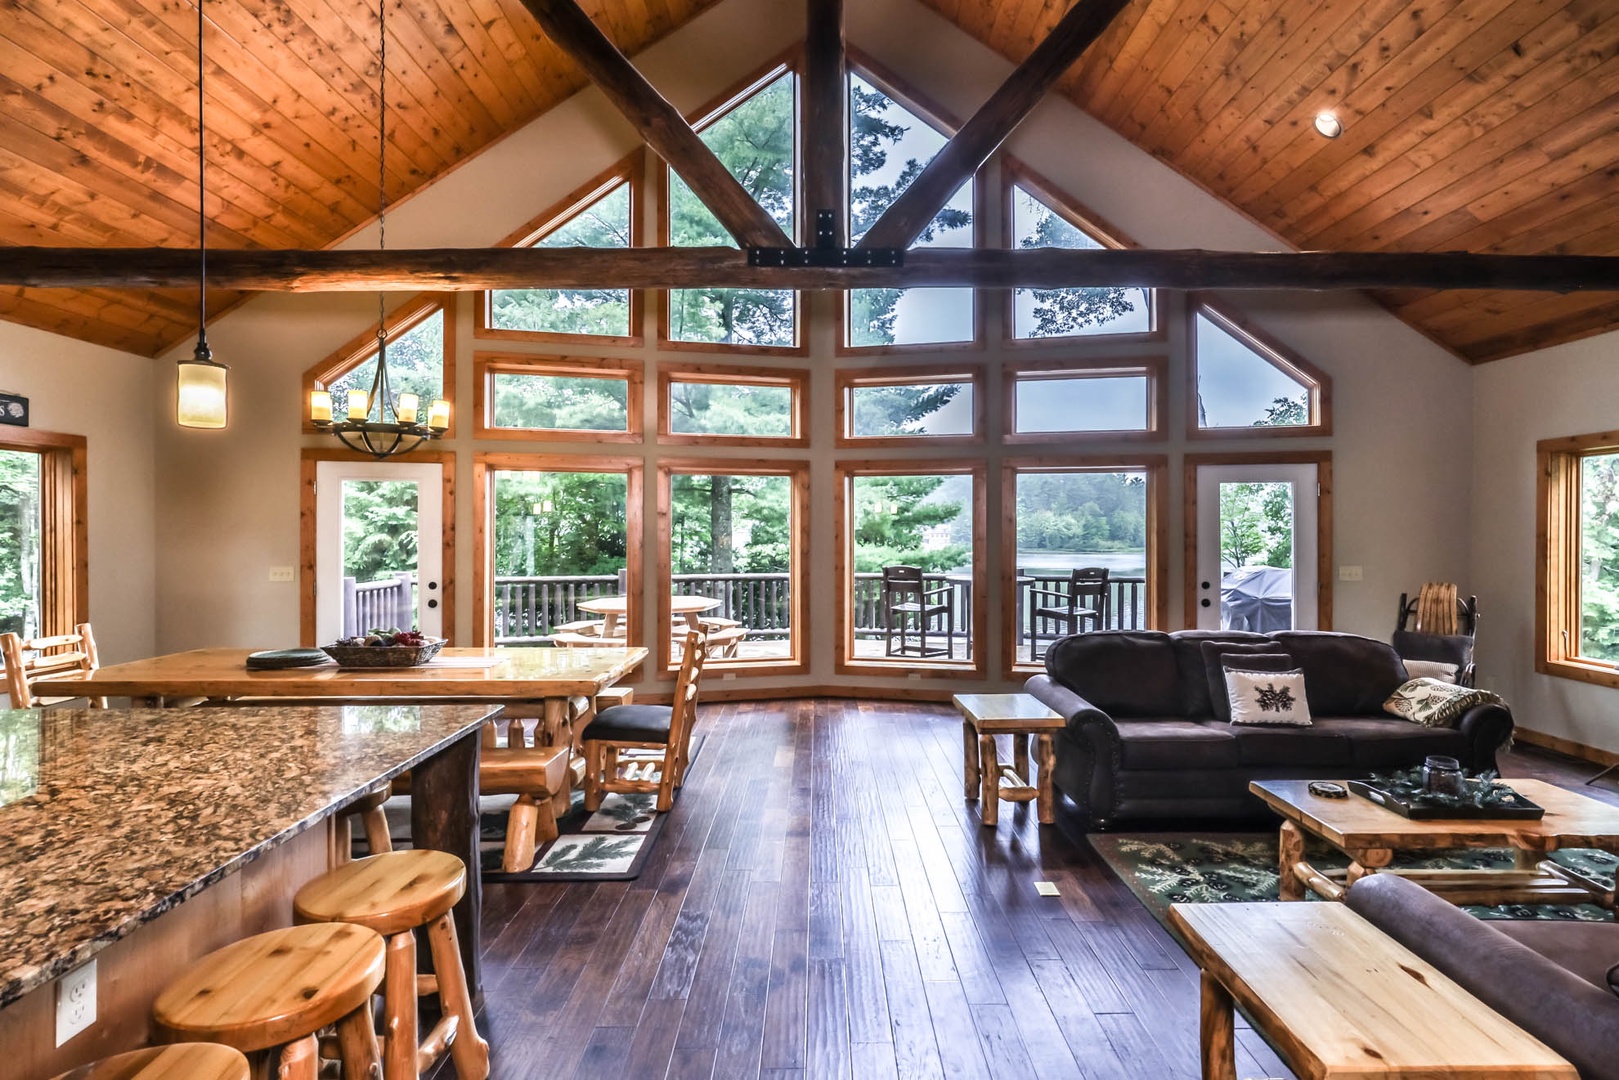 Cranberry Lake Chalet - Hiller Vacation Homes